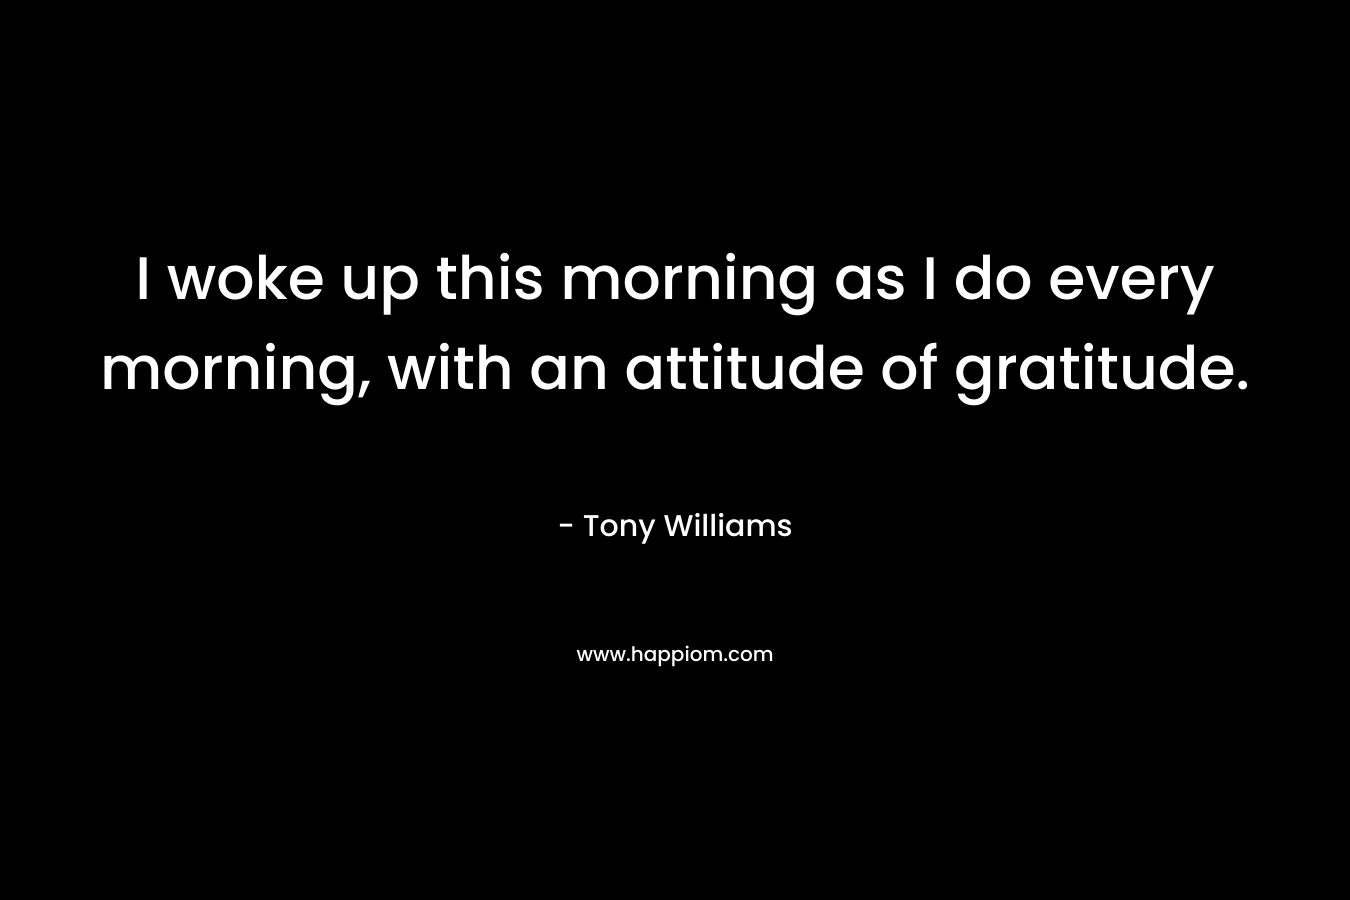 I woke up this morning as I do every morning, with an attitude of gratitude.